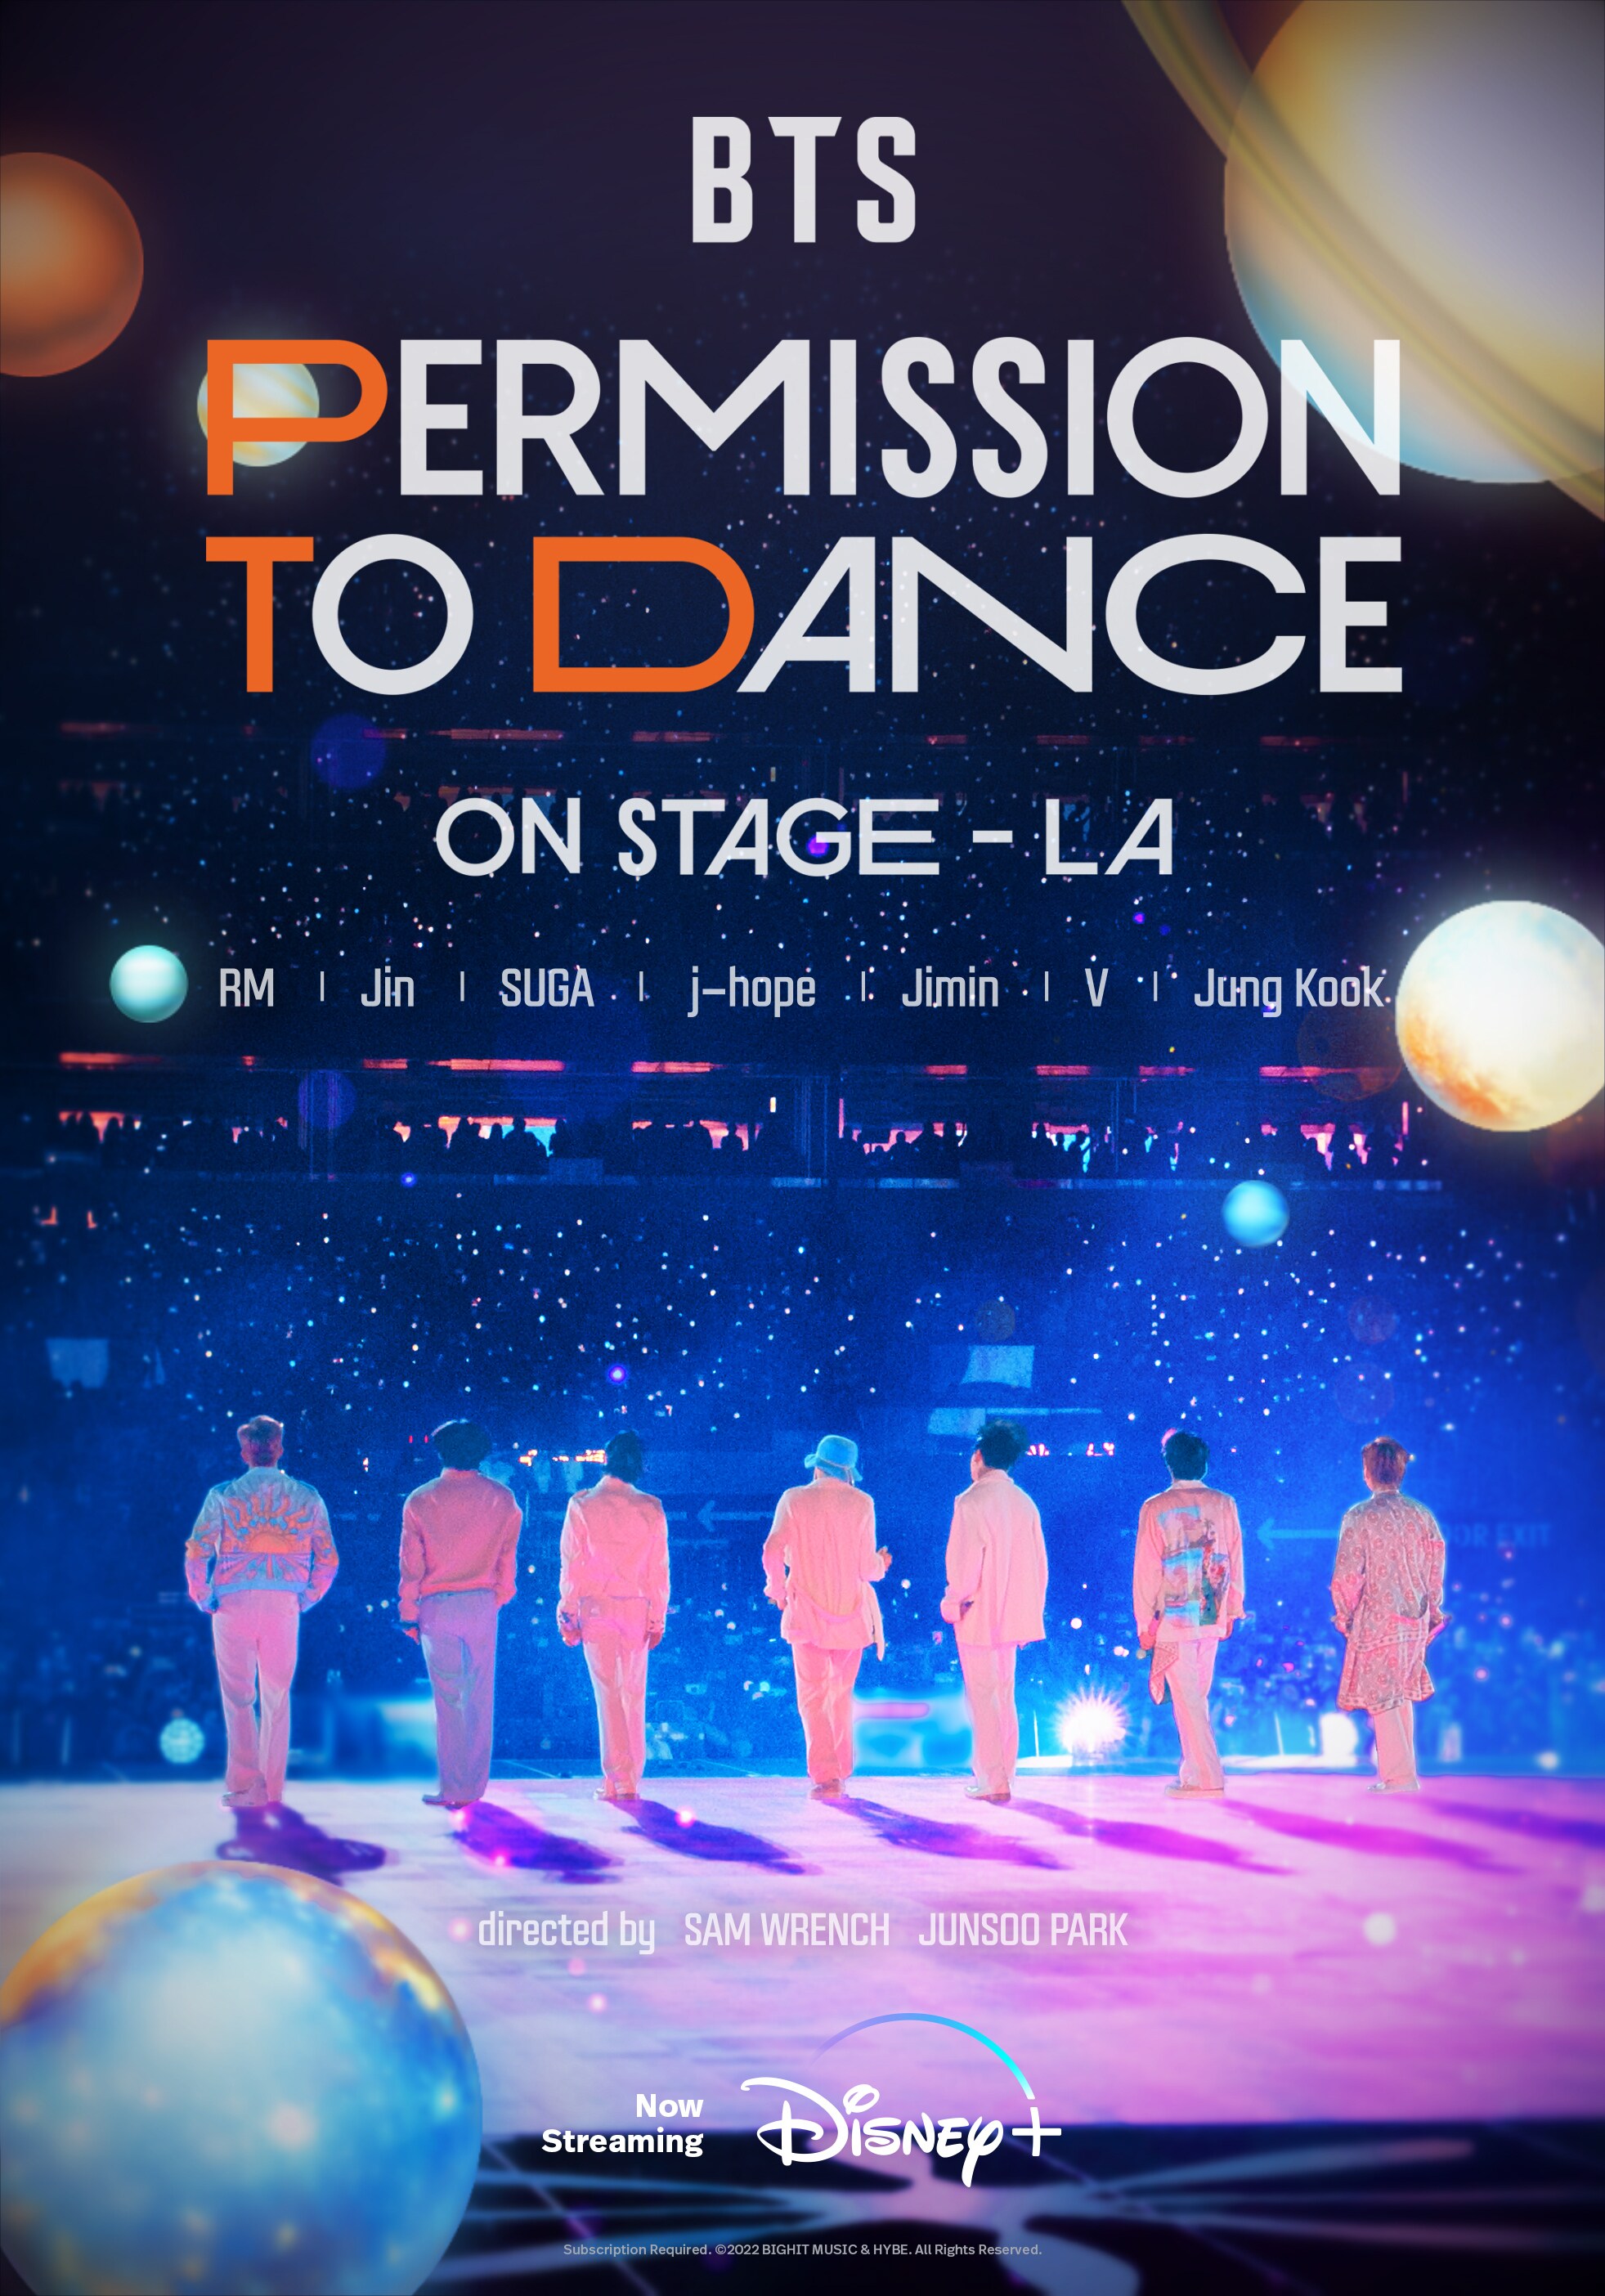 BTS PERMISSION TO DANCE ON STAGE inTHEUS